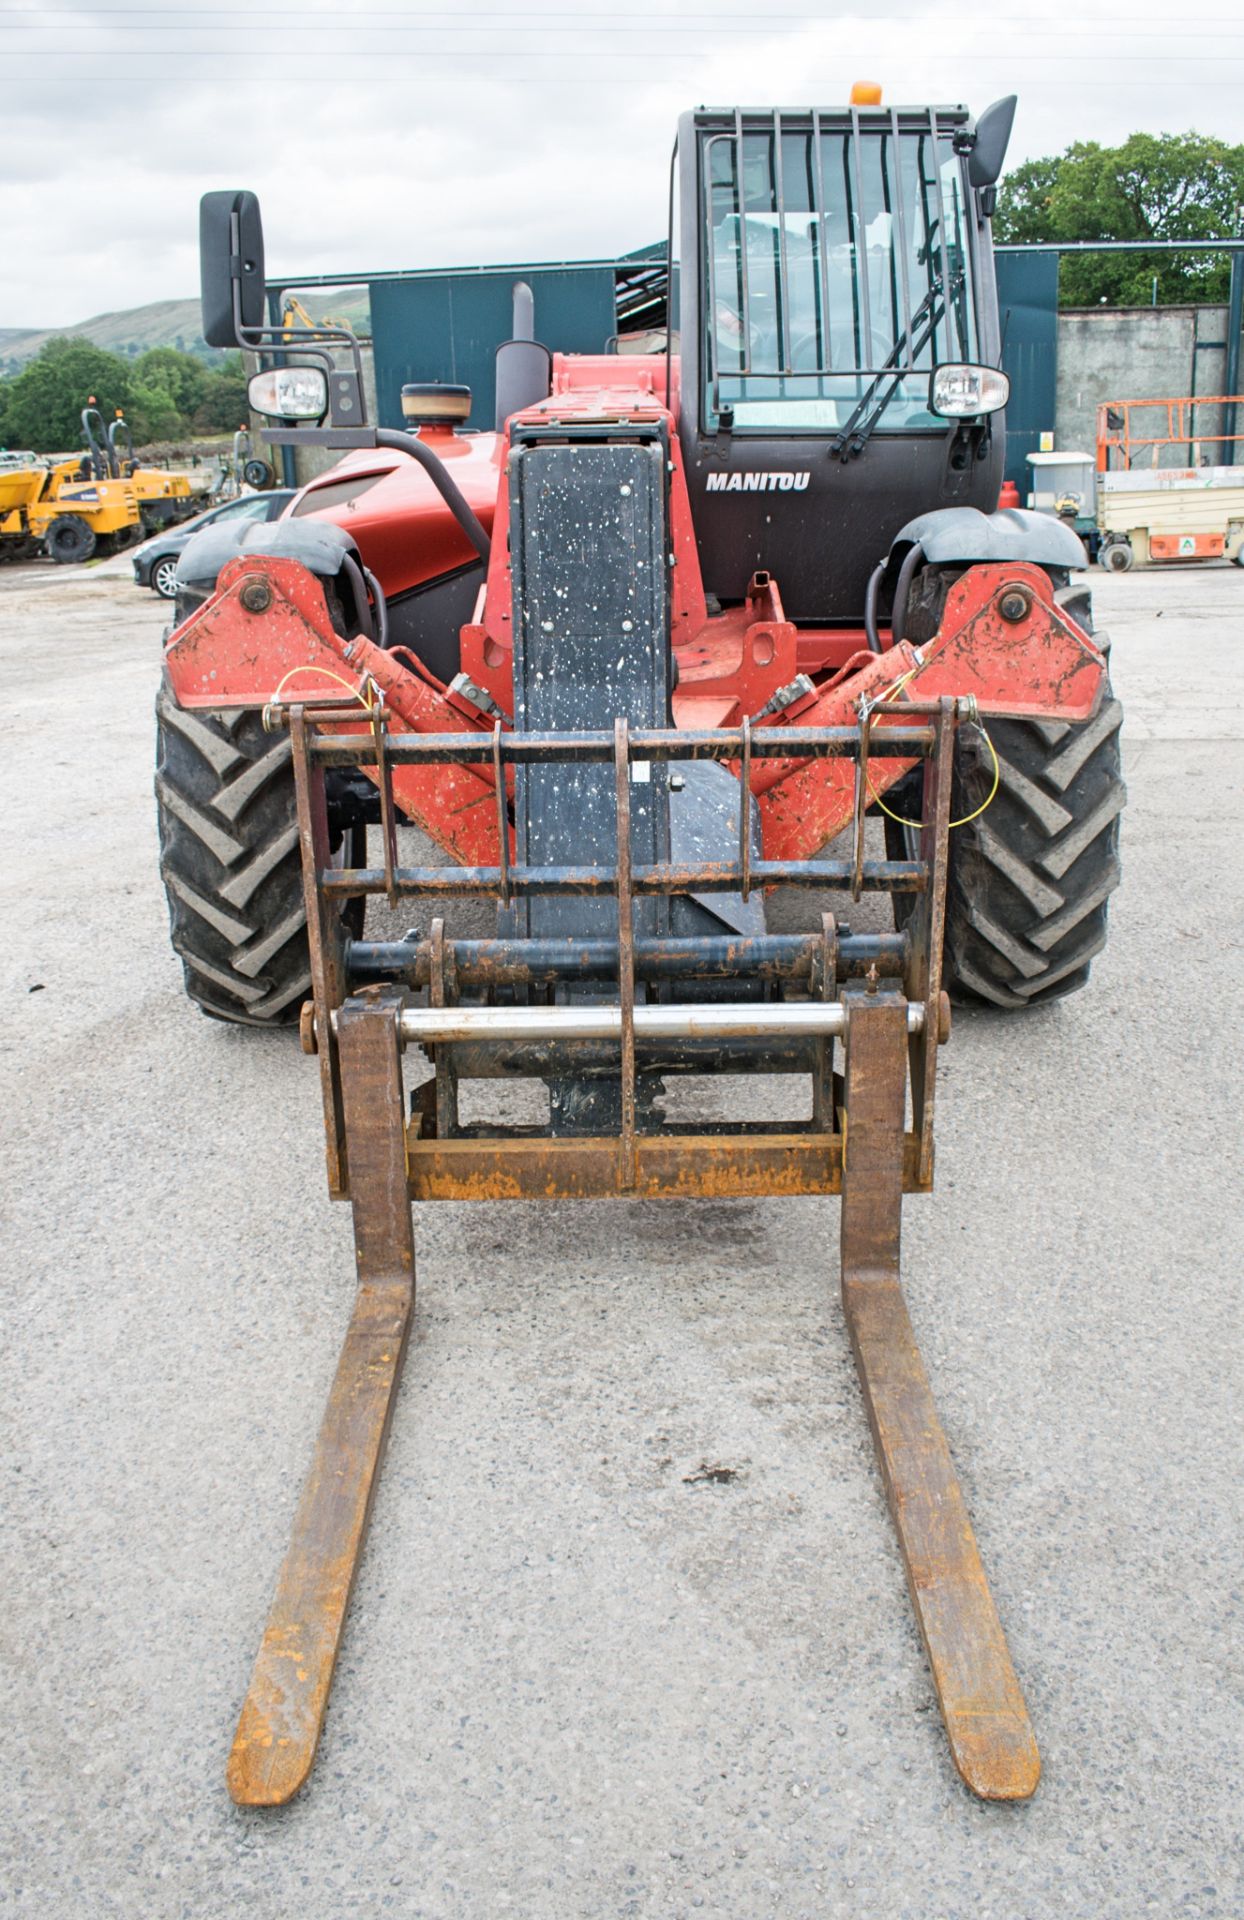 Manitou MT1235 ST 12 metre telescopic handler Year: 2011 S/N: 593550 Recorded Hours: 2568 18422 - Image 5 of 13